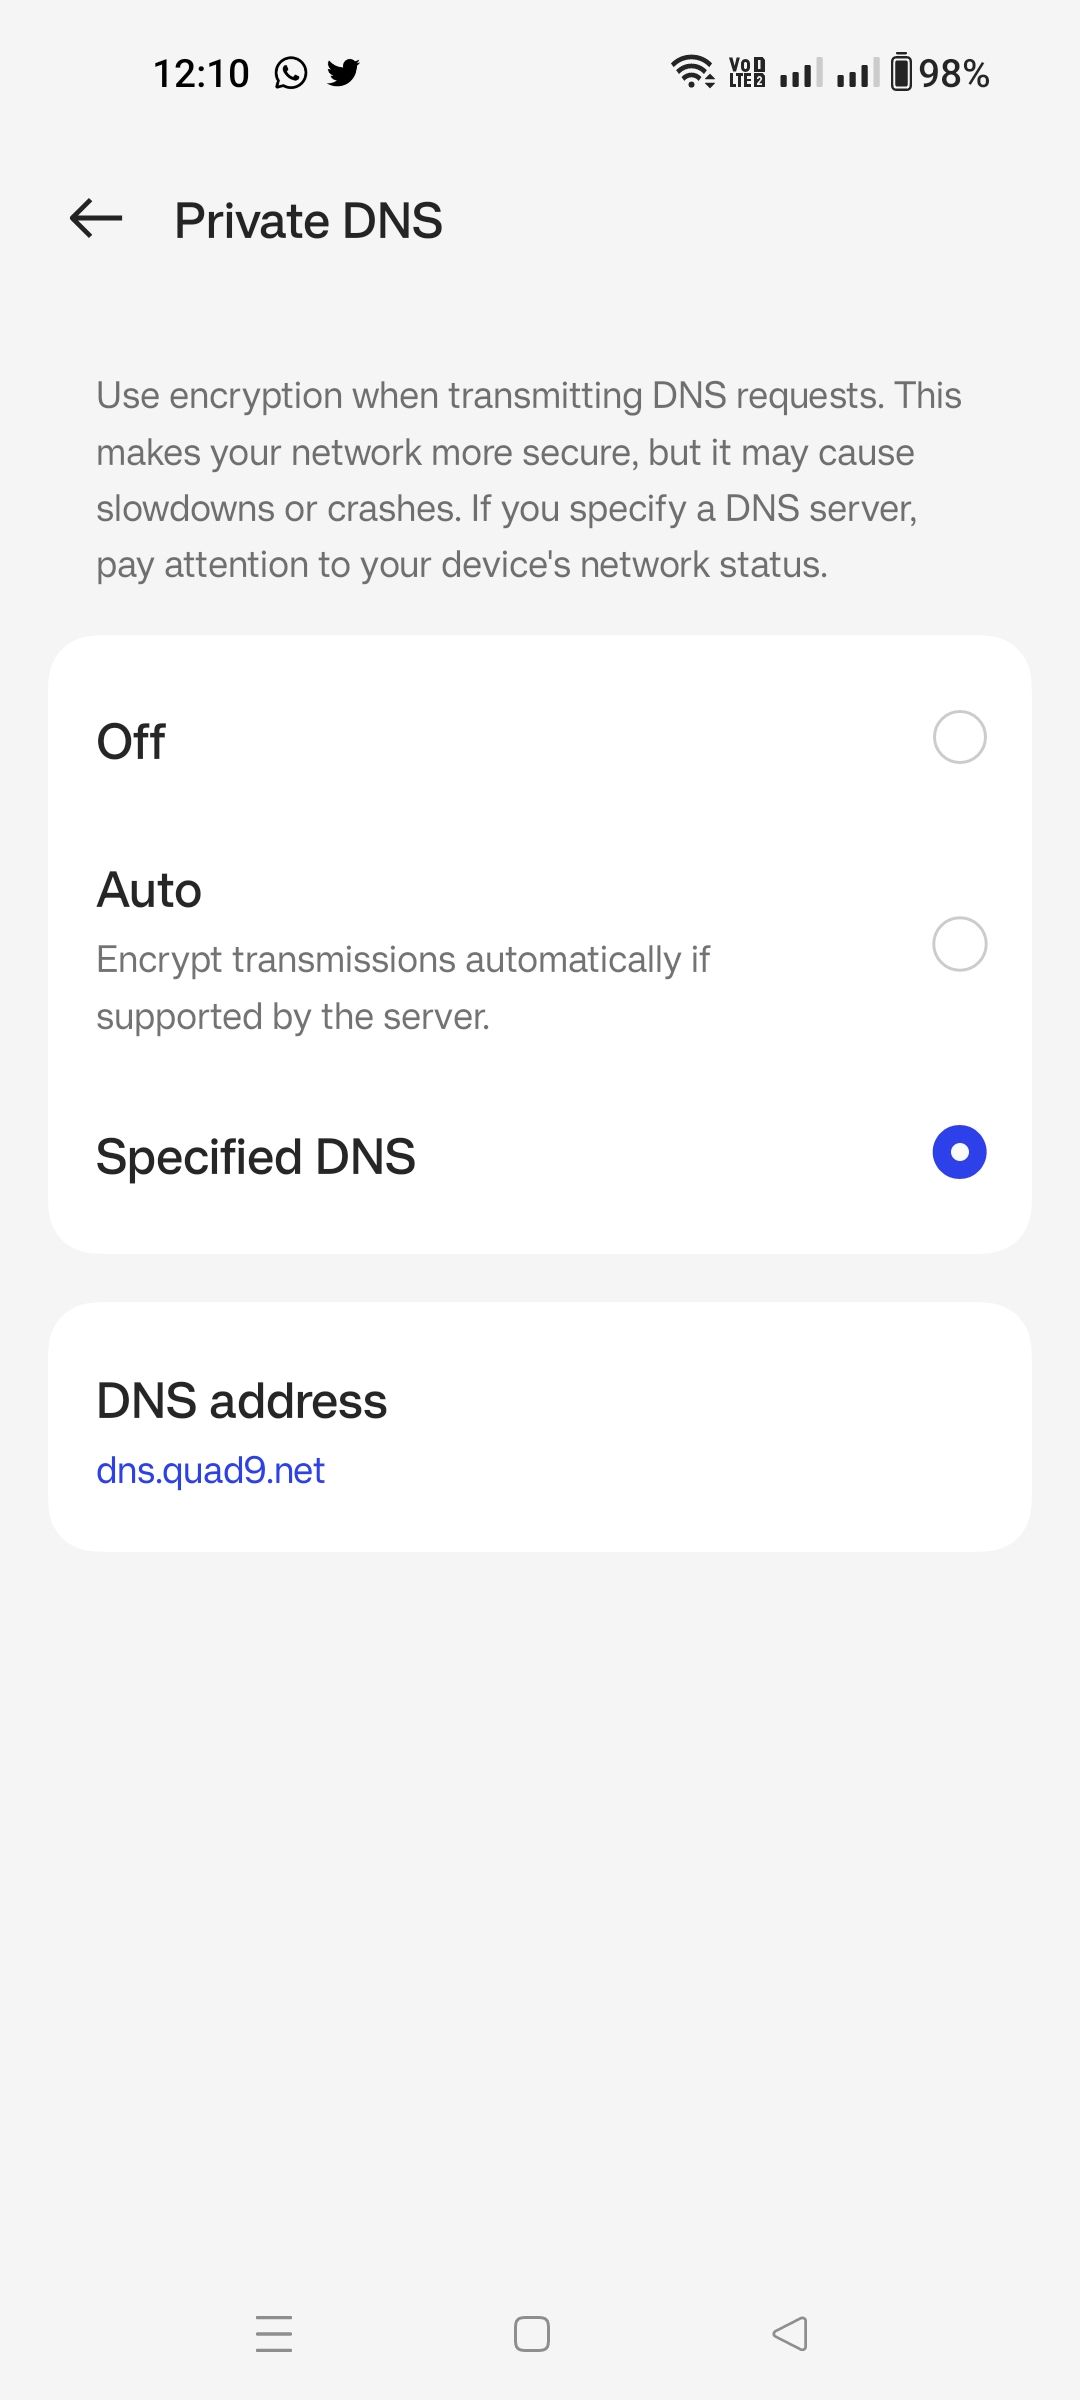 Scrneenshot-of-Specified-Private-DNS